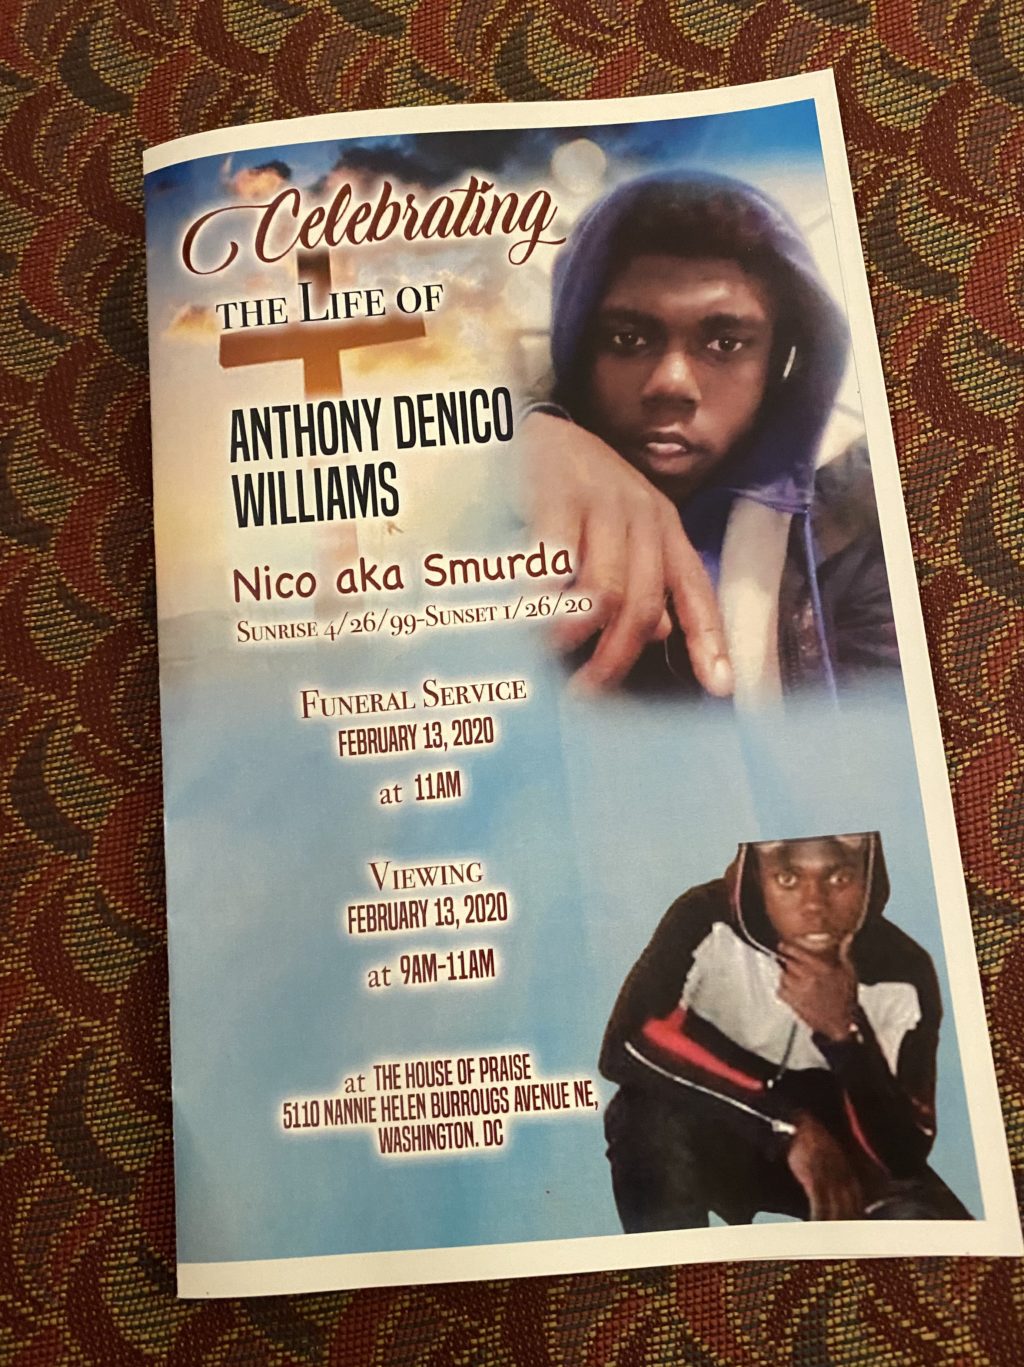 A funeral service program which includes photos of a young black man in a hoodie and his name and details about the funeral and viewing